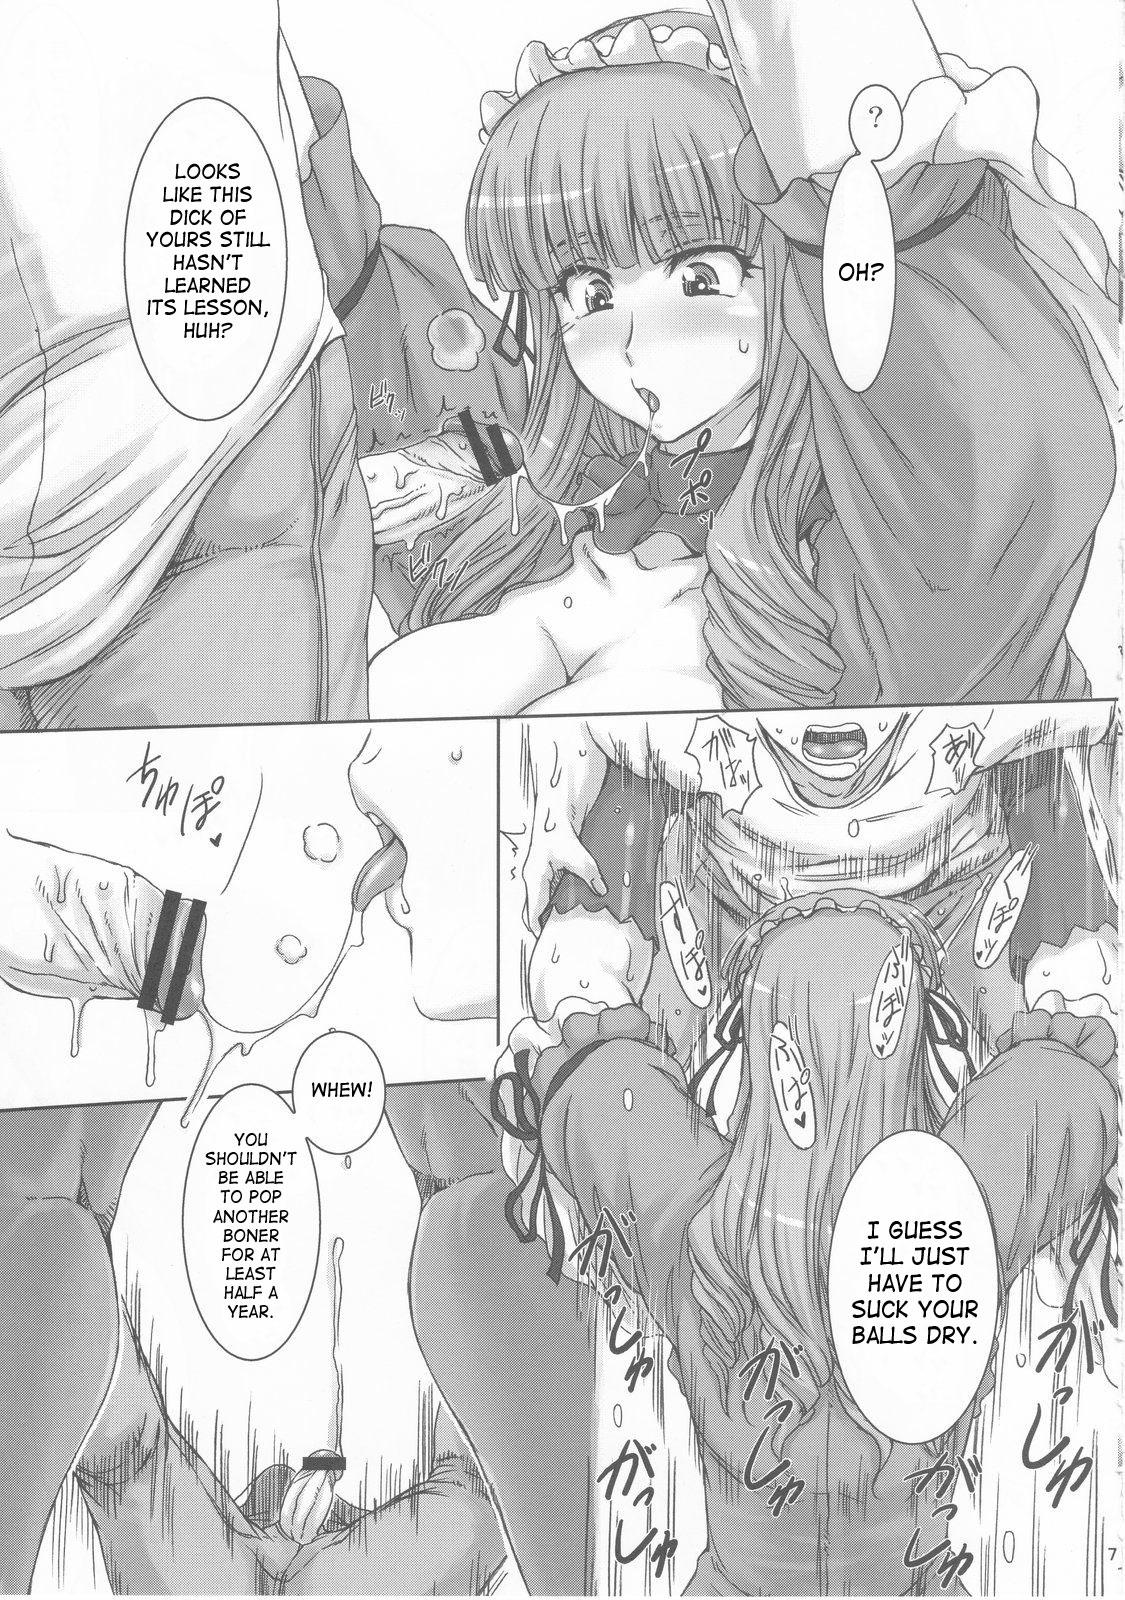 3way Haijo Wrestle Tsuushin 2nd Impact Giant Attack - Wrestle angels Perverted - Page 6